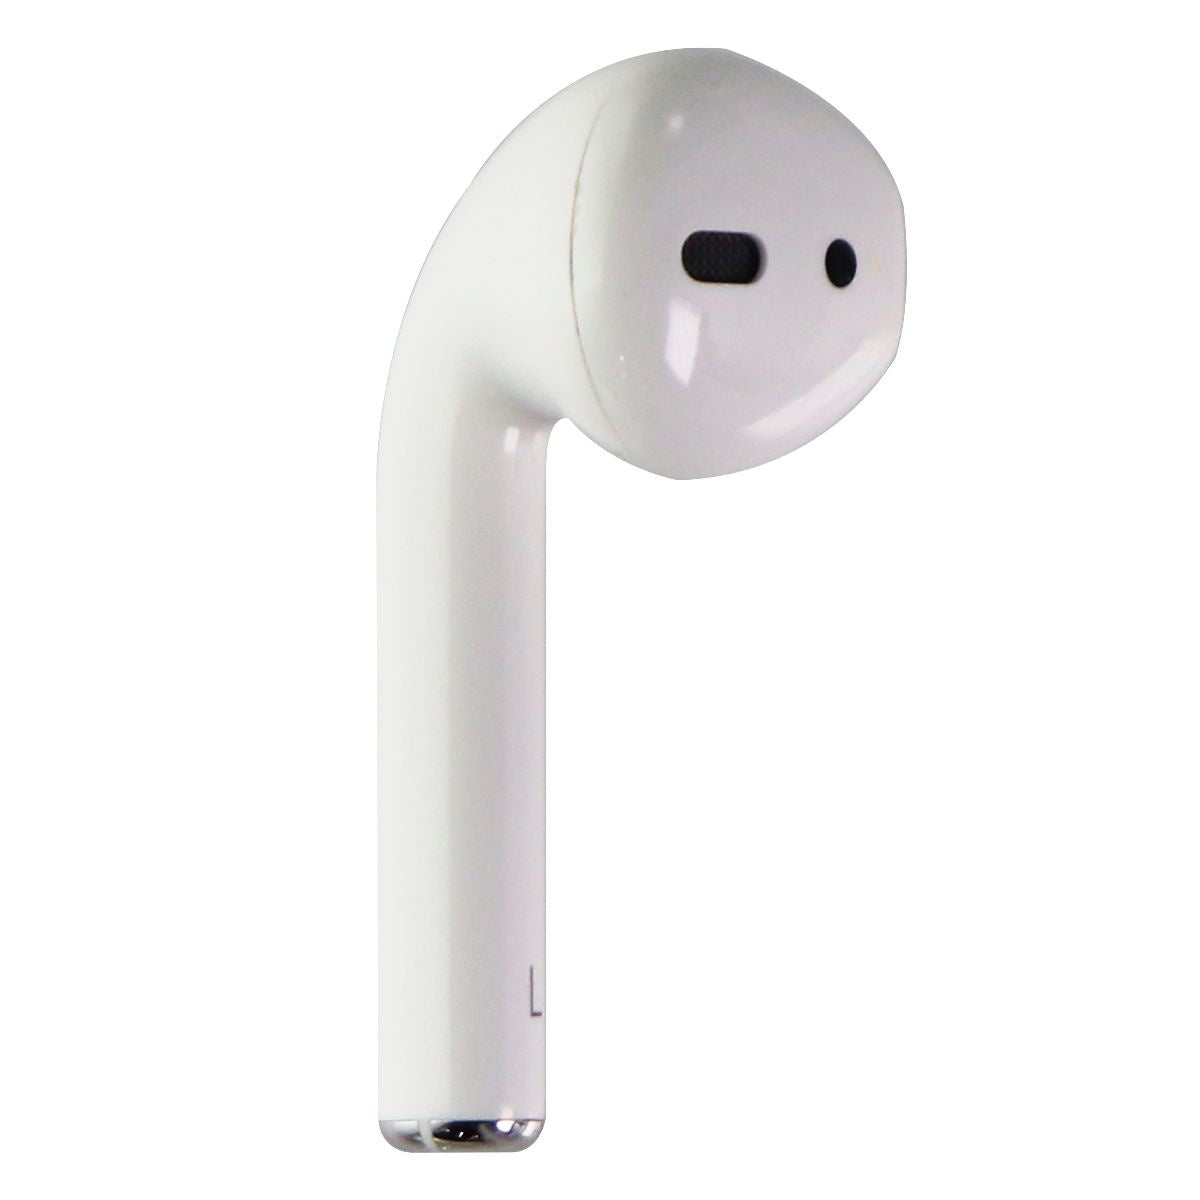 Apple Airpod Left Side Only (A2031) 2nd Generation - White Portable Audio - Headphones Apple    - Simple Cell Bulk Wholesale Pricing - USA Seller